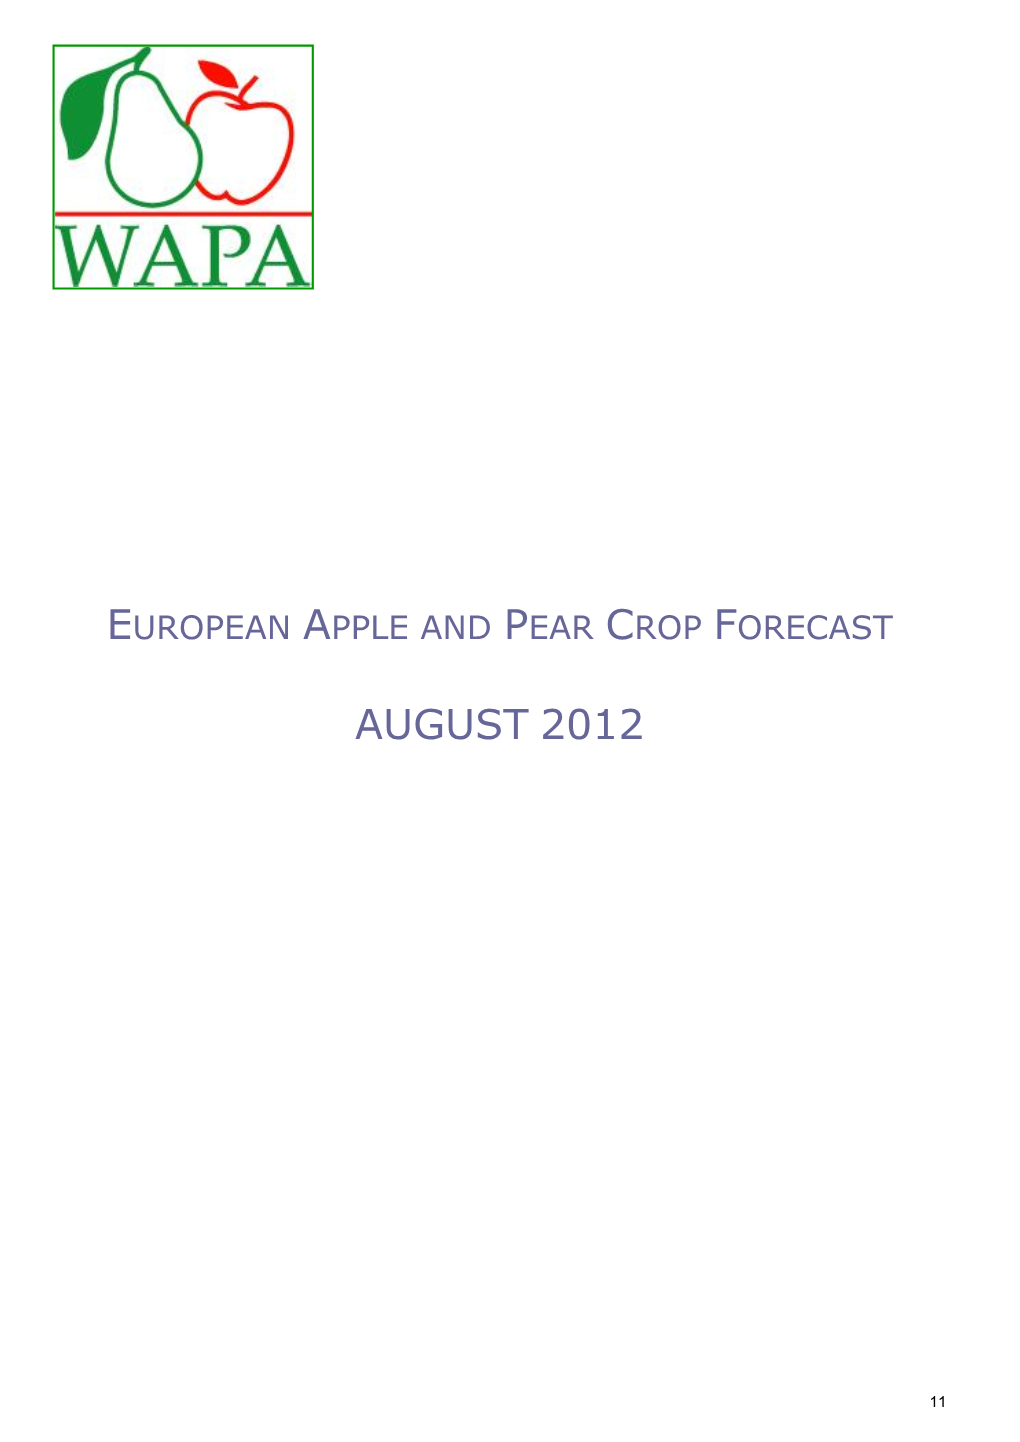 WAPA, the World Apple and Pear Association, Is Pleased to Provide the 2012 European Apple and Pear Crop Estimate